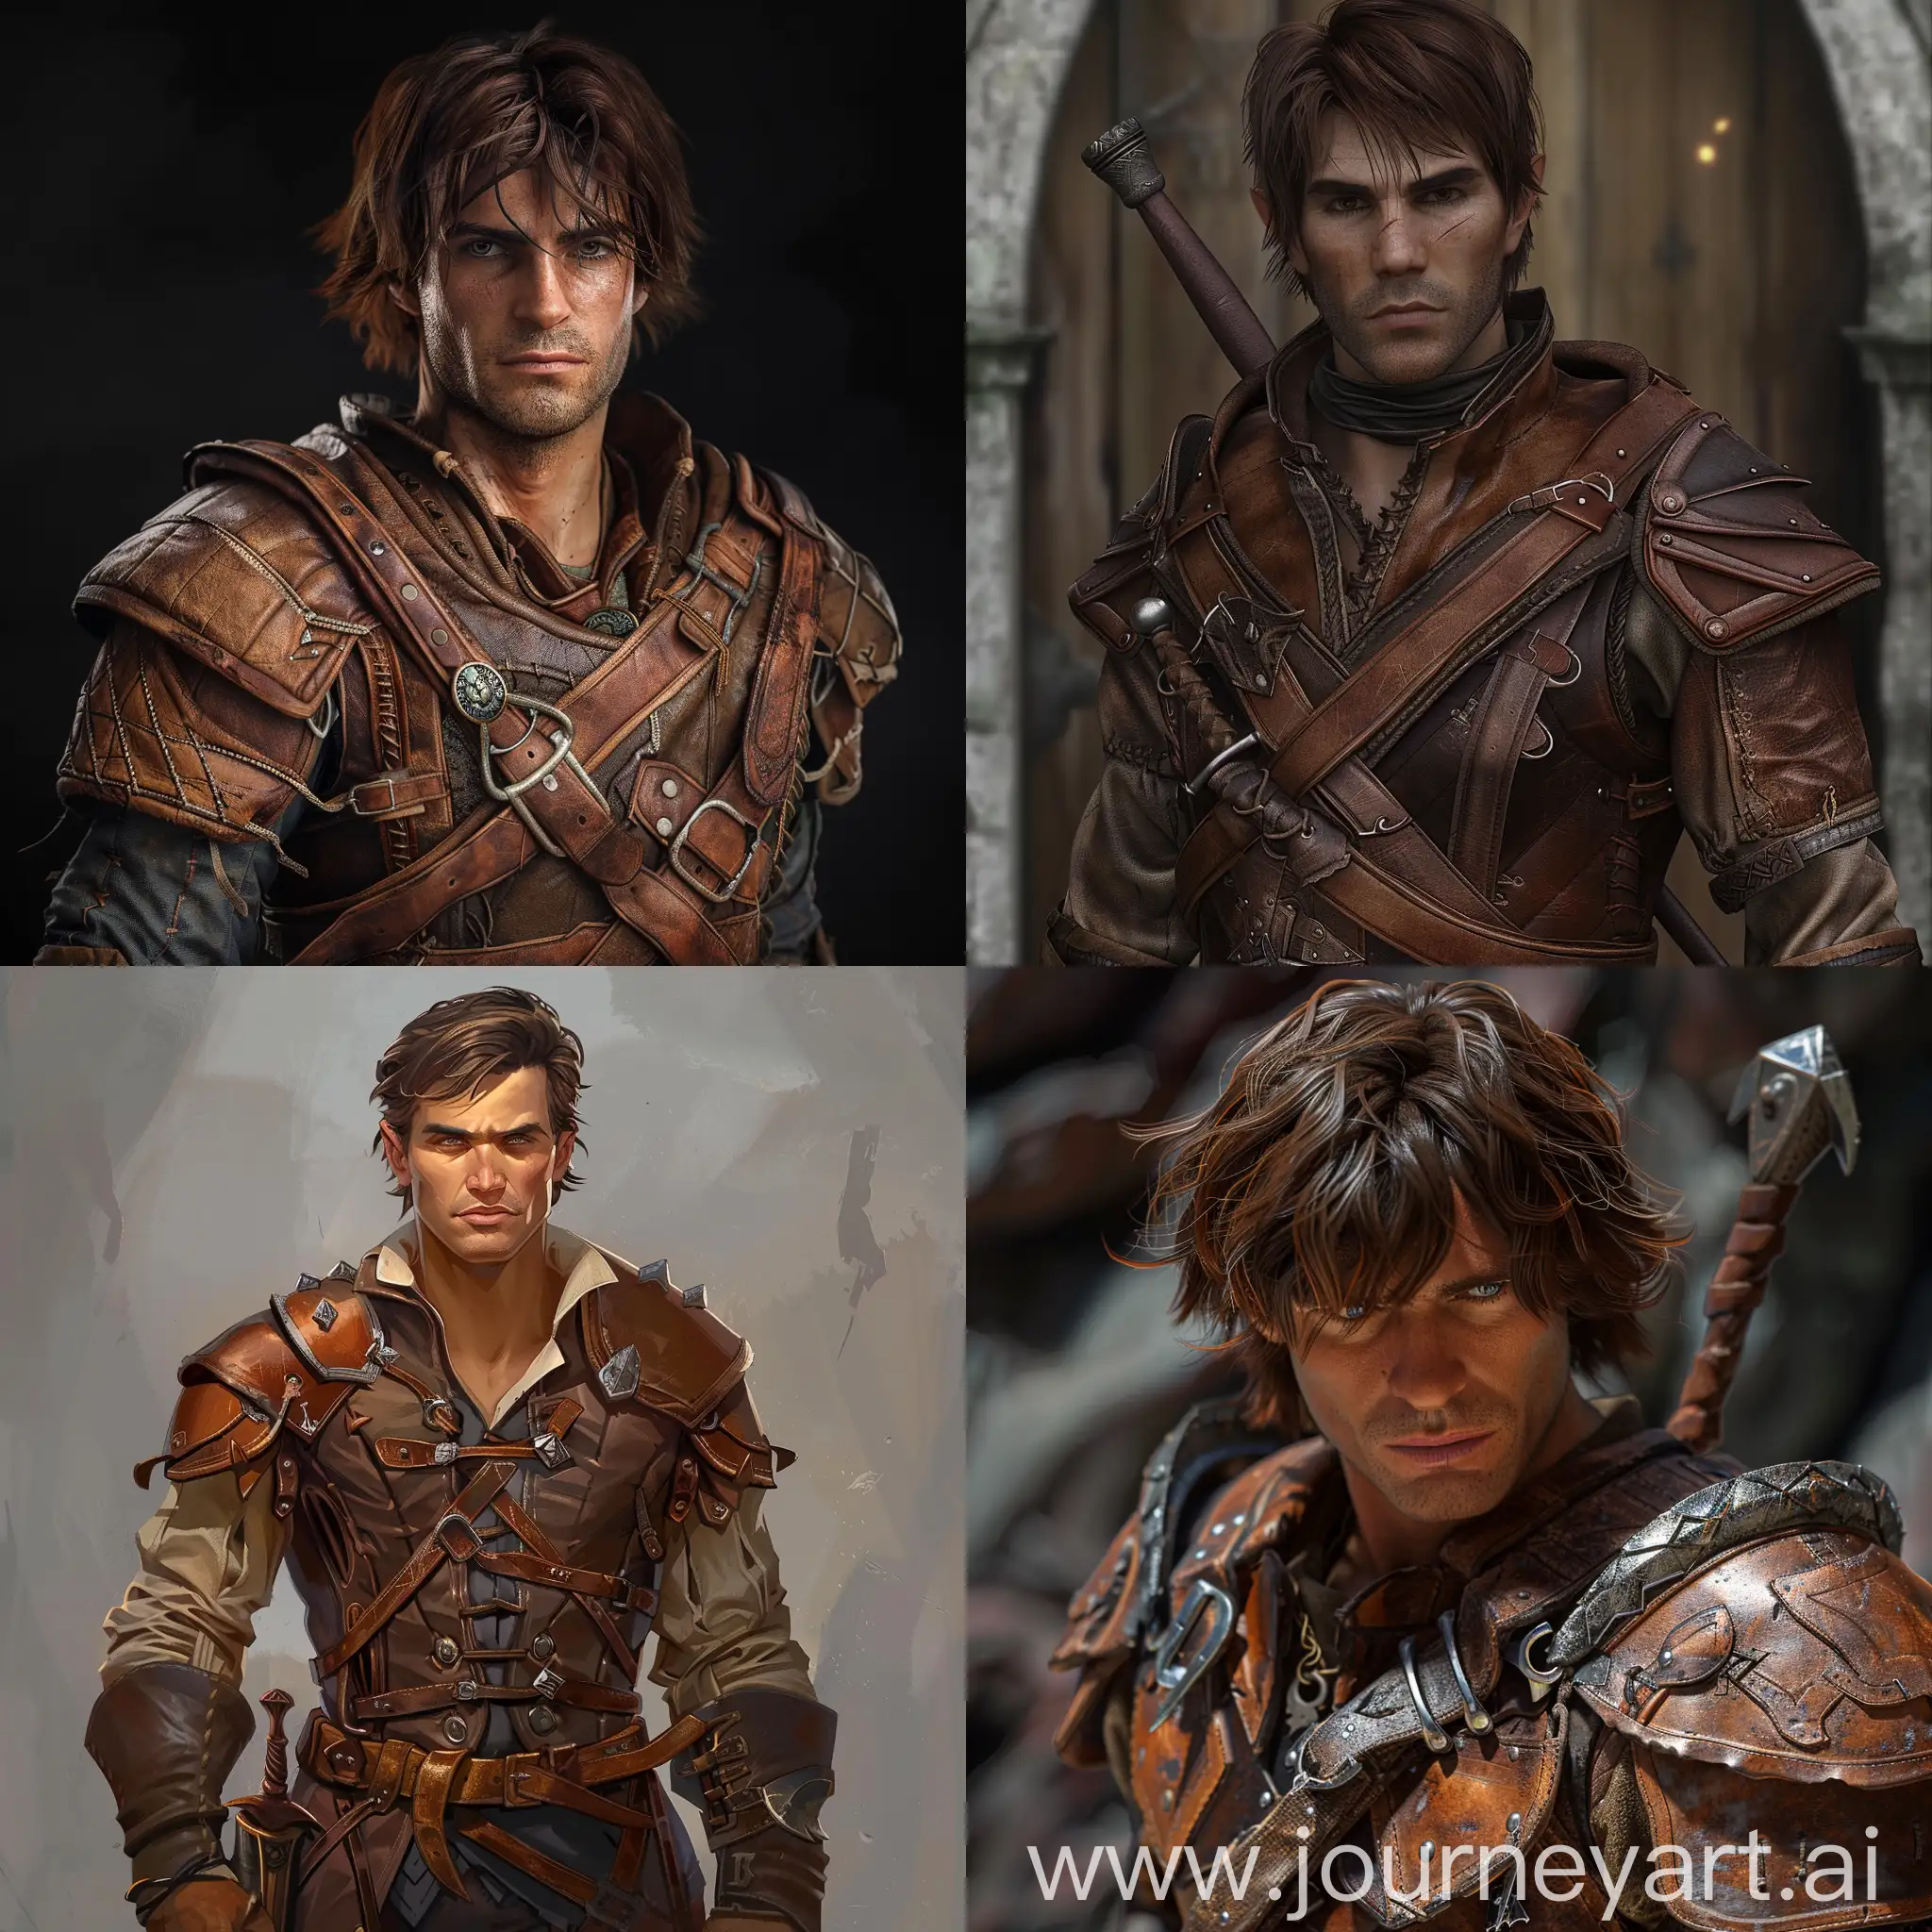 create a human rogue with brown hair, leather armour, and who obviously things very highly of himself